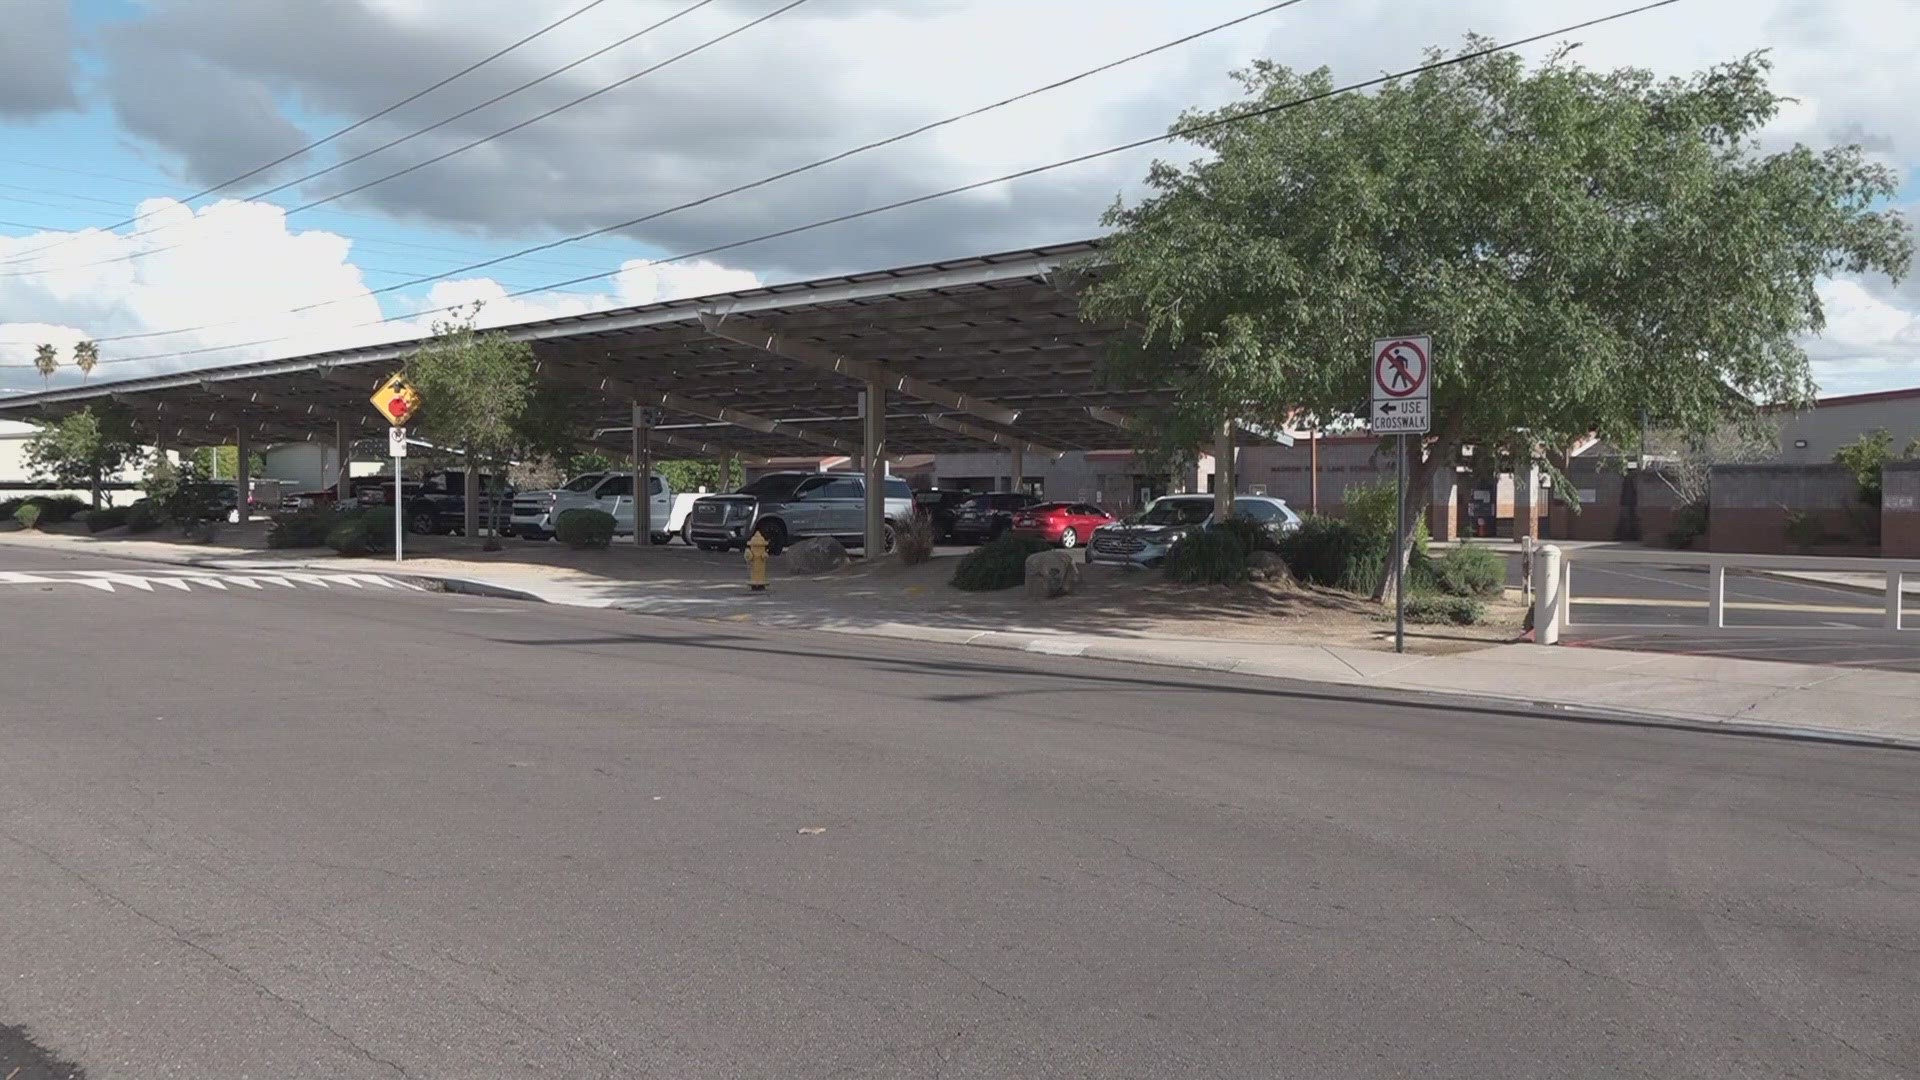 Police are investigating after a student boarded a school bus with a gun. It happened on the way to Madison Rose Elementary school in Phoenix Monday morning.